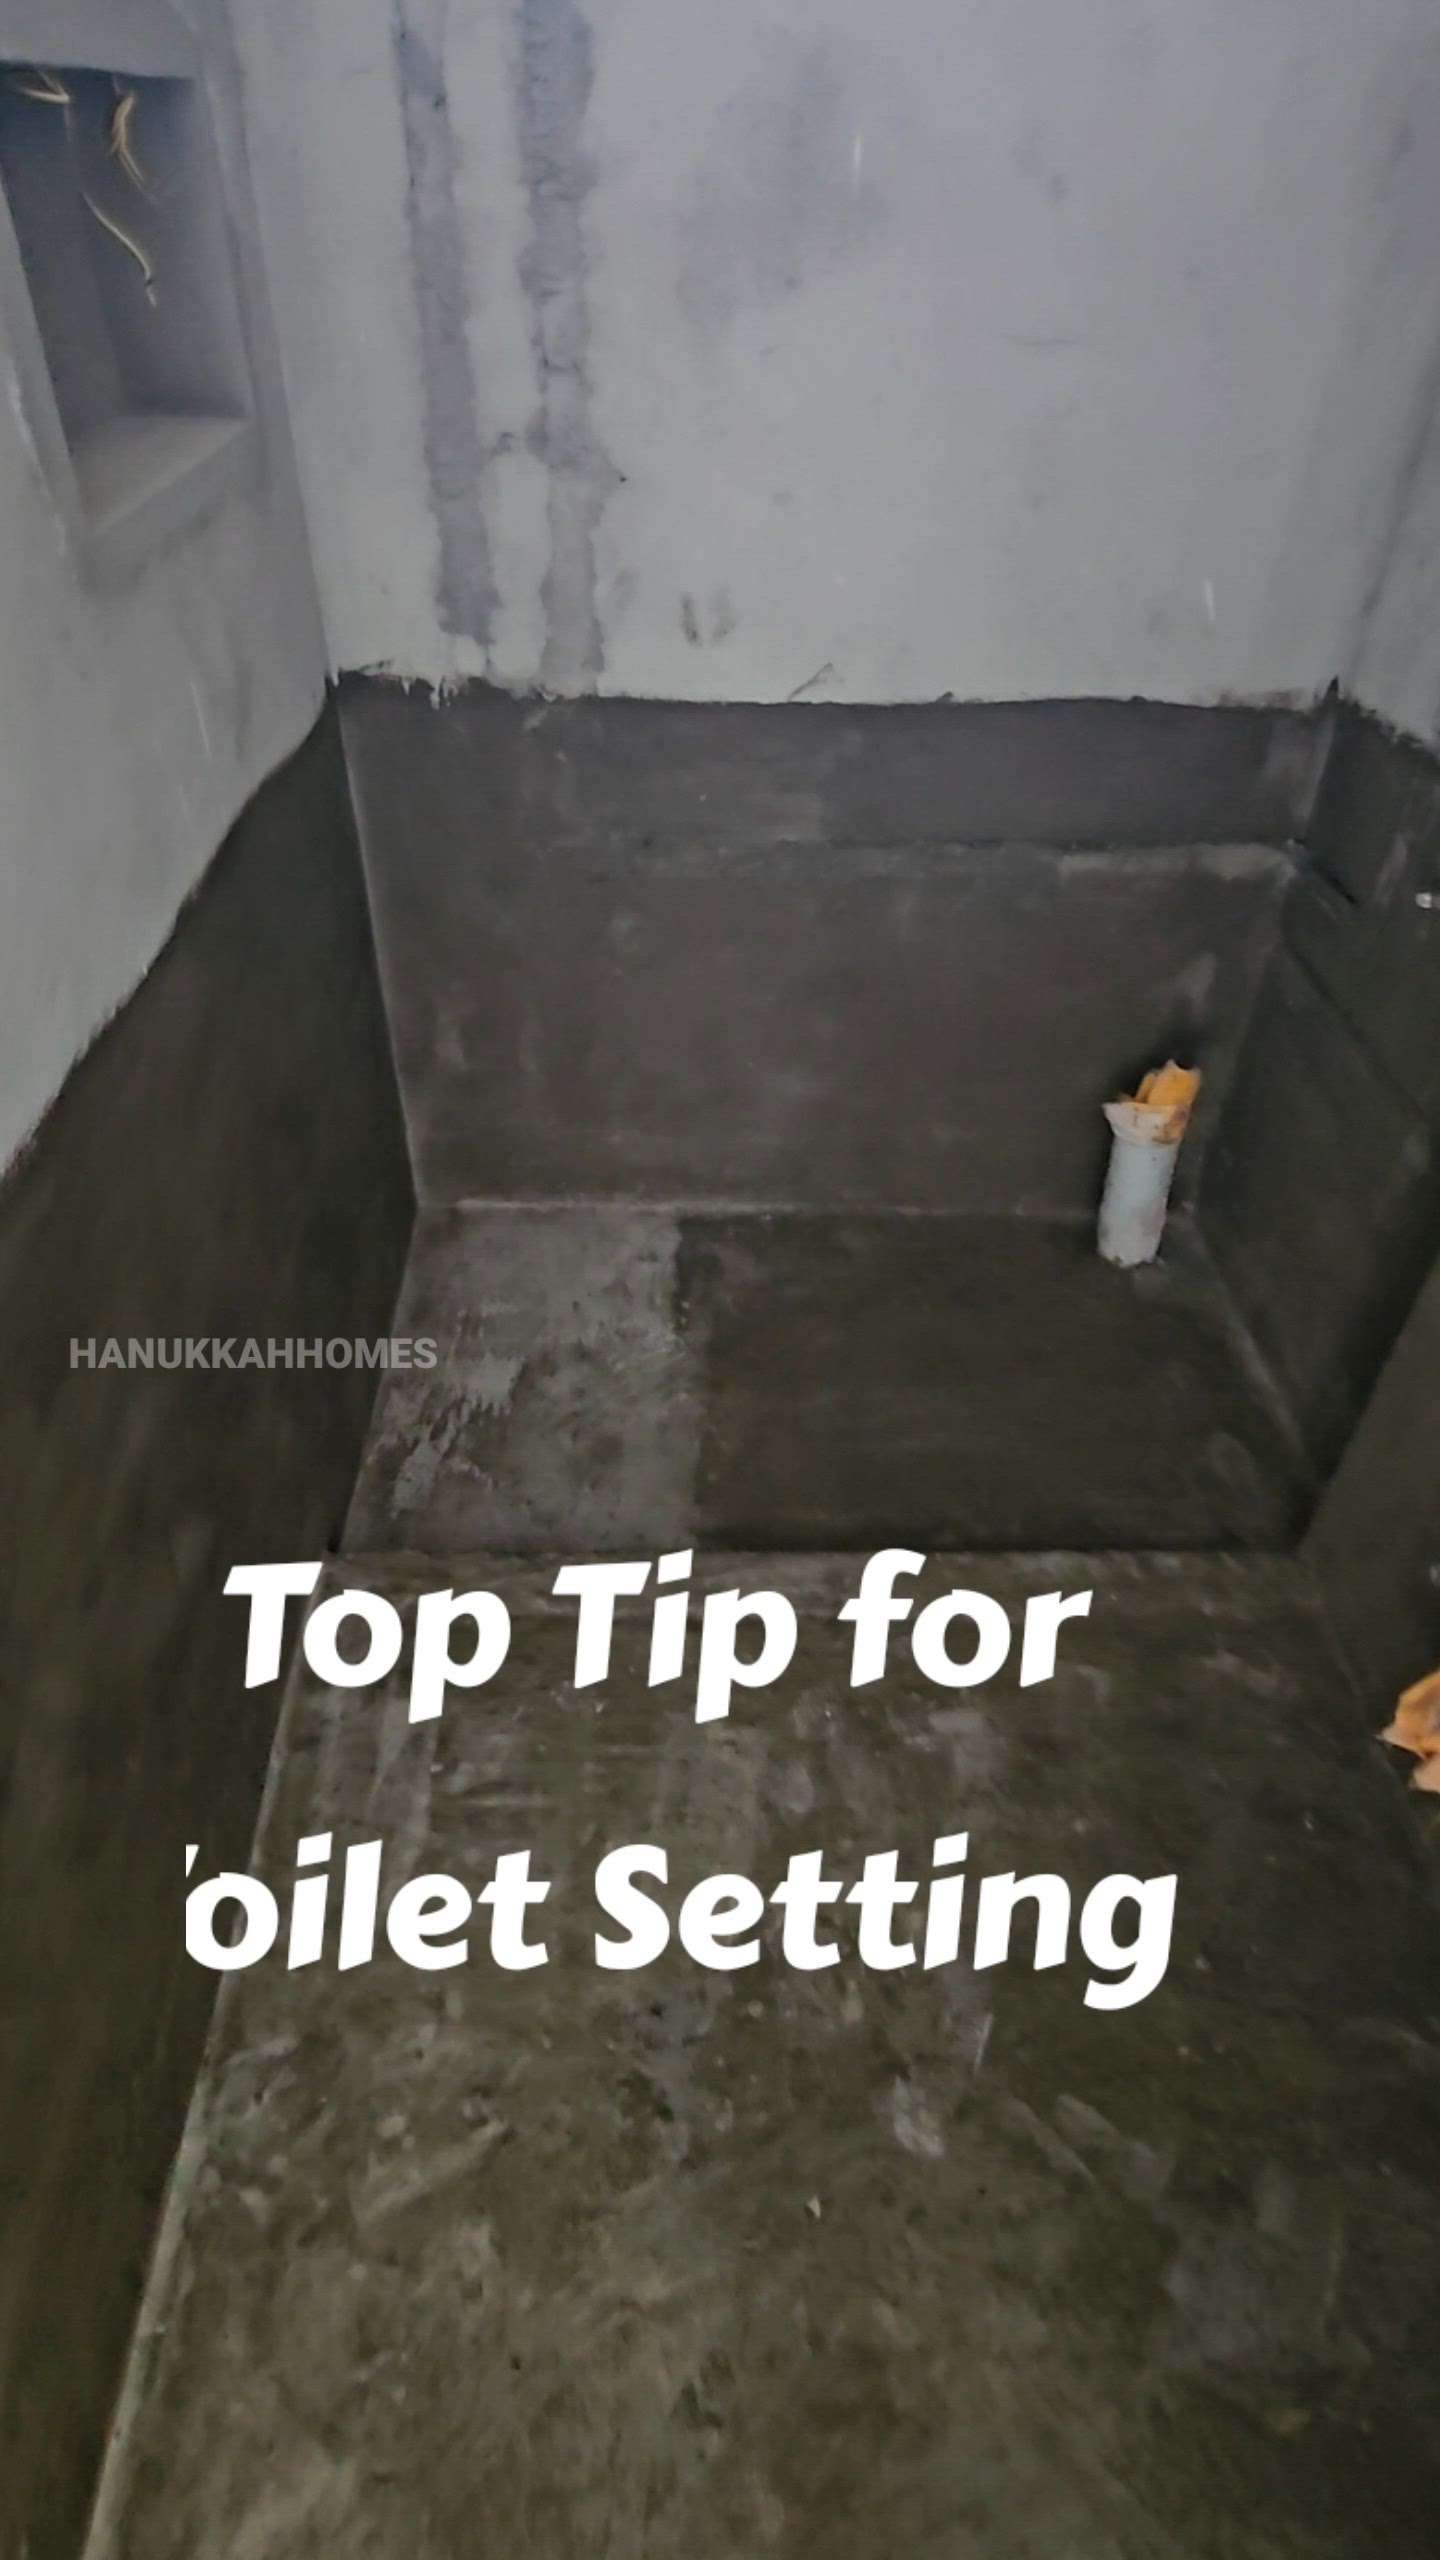 Top Tip for Toilet Setting #creatorsofkolo #important #dreamhome #onetip #planning